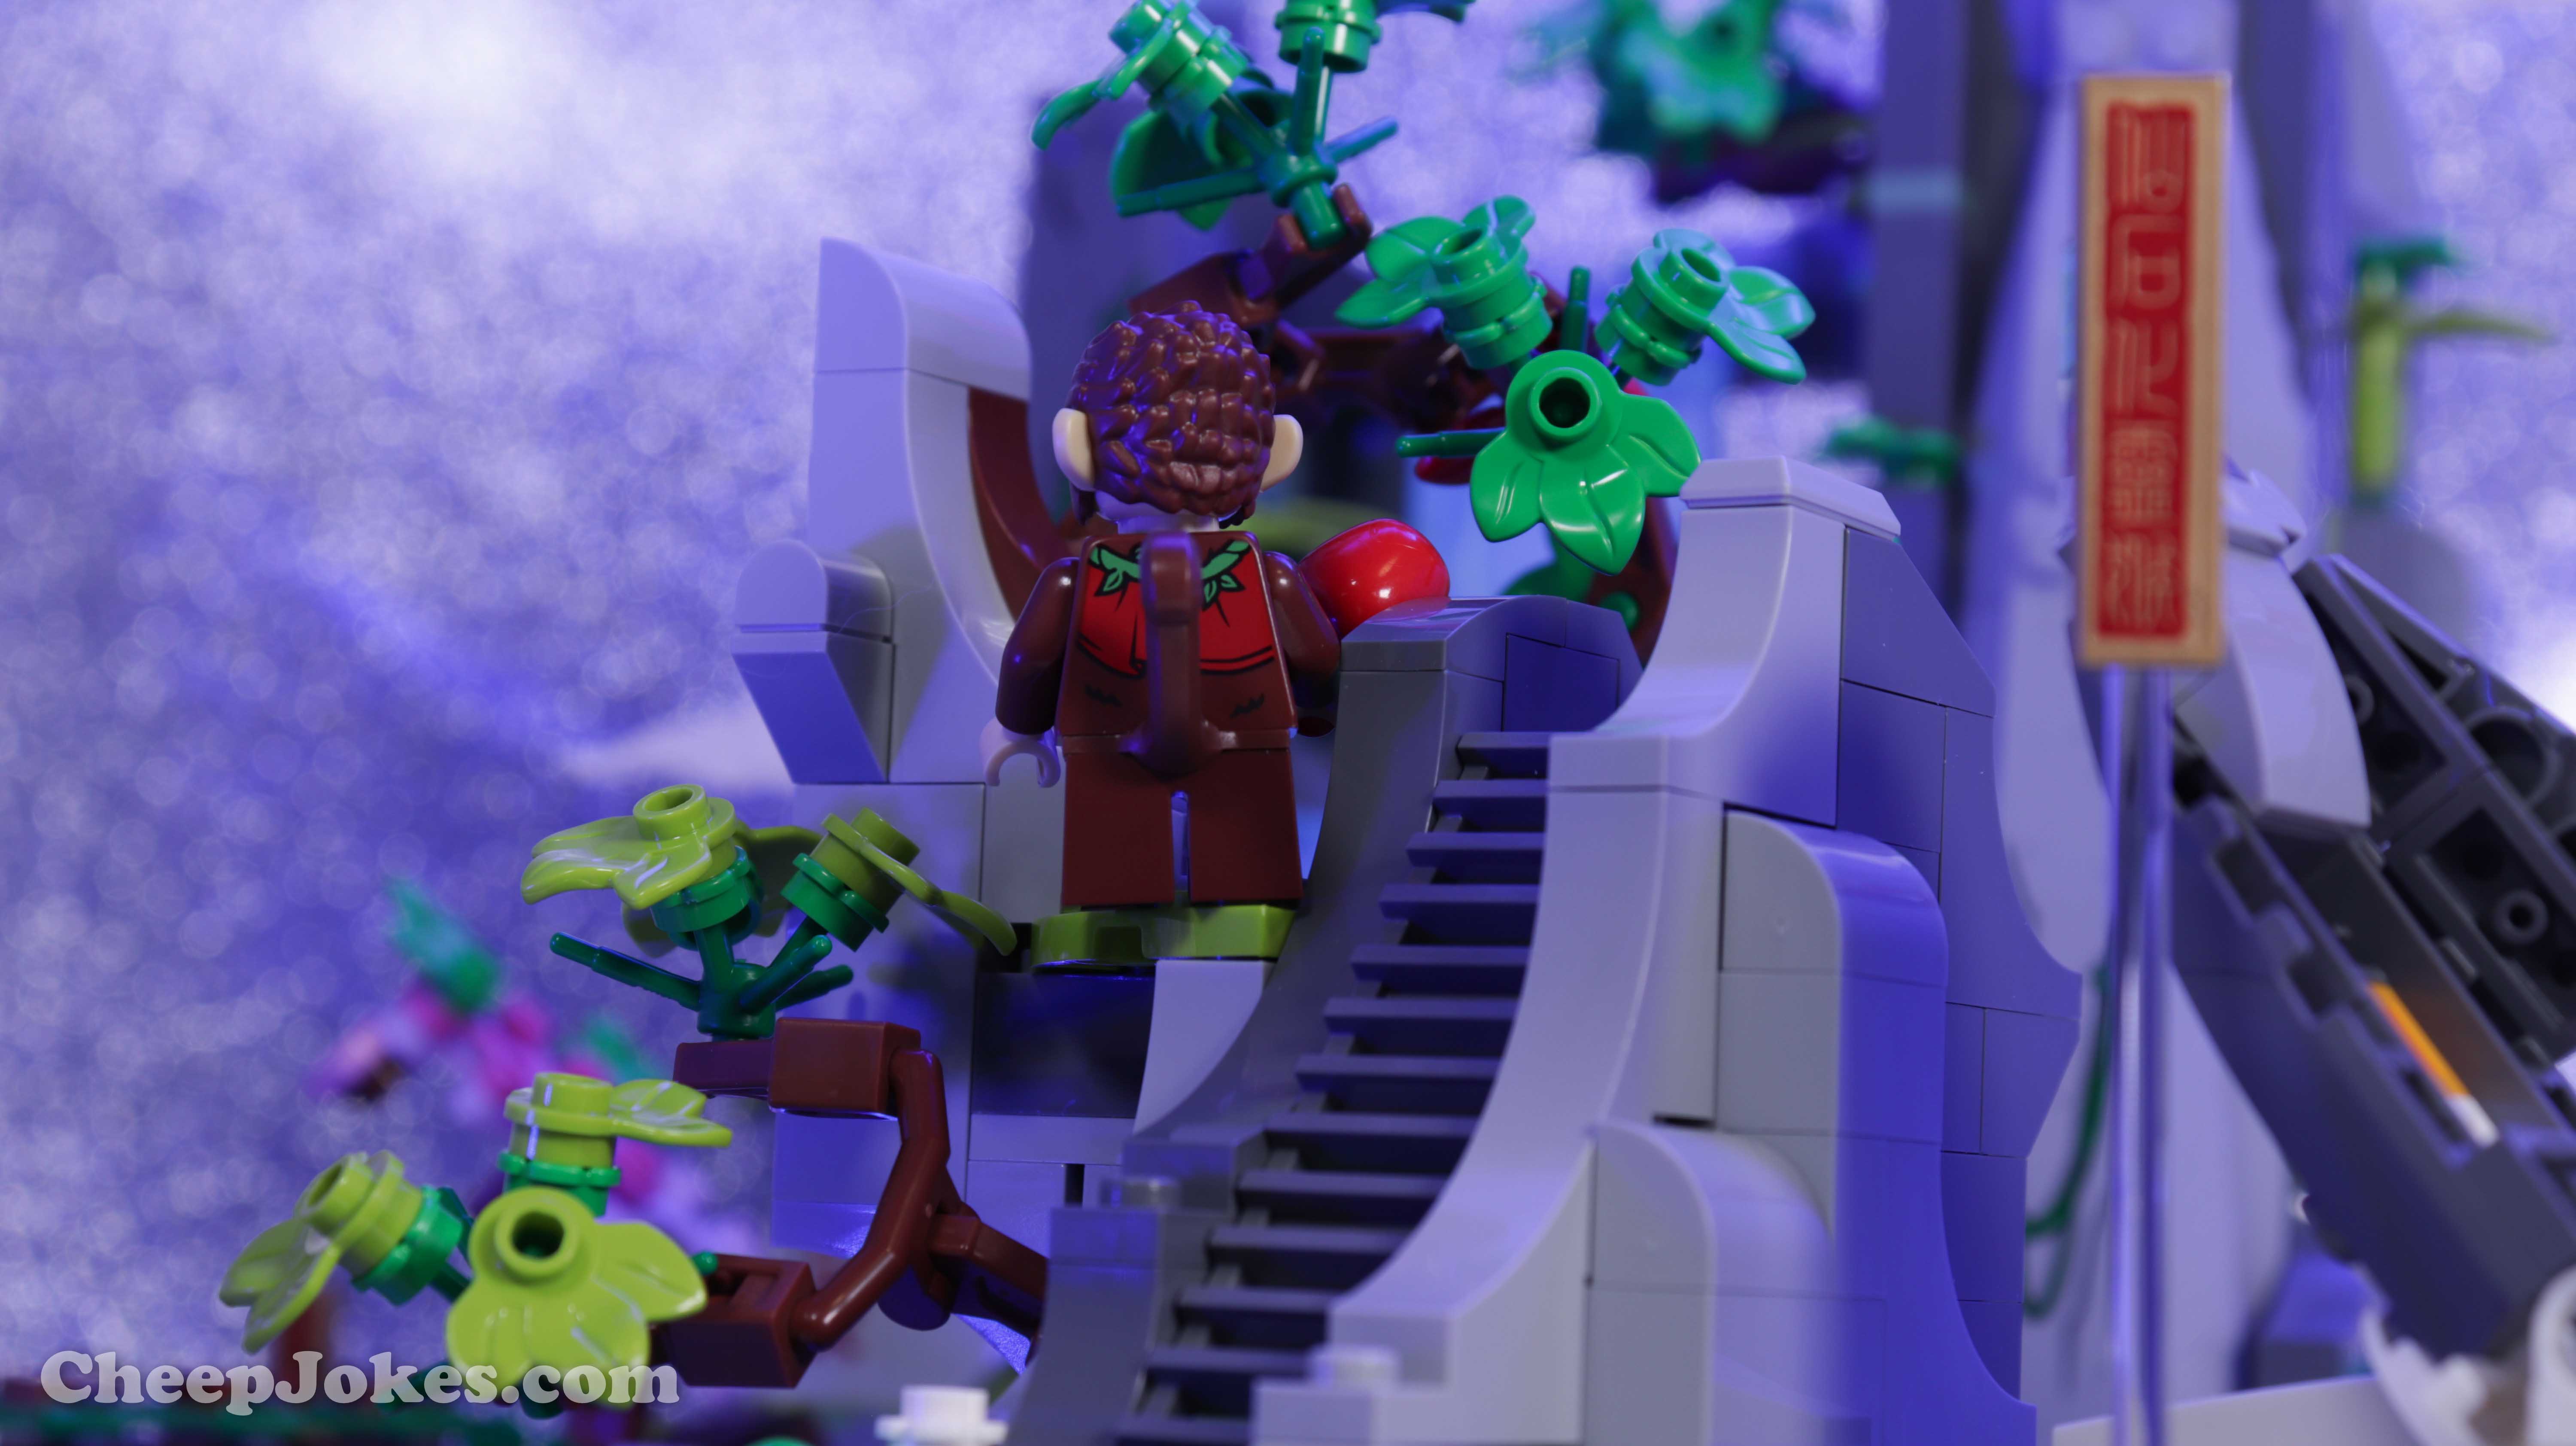 Children can bring the legend of the Monkey King to life as they build this detailed LEGO® Monkie Kid™ model of the iconic Flower Fruit Mountain (80024). Every section of the premium-quality toy playset tells a different story, from how he was born to how he became king of the monkeys, with features such as an opening rock to reveal the Monkey King and a buildable waterfall that opens to allow entry to the hidden mountain cave. There are 8 minifigures, including 4 different versions of Monkey King to play out specific legendary tales.